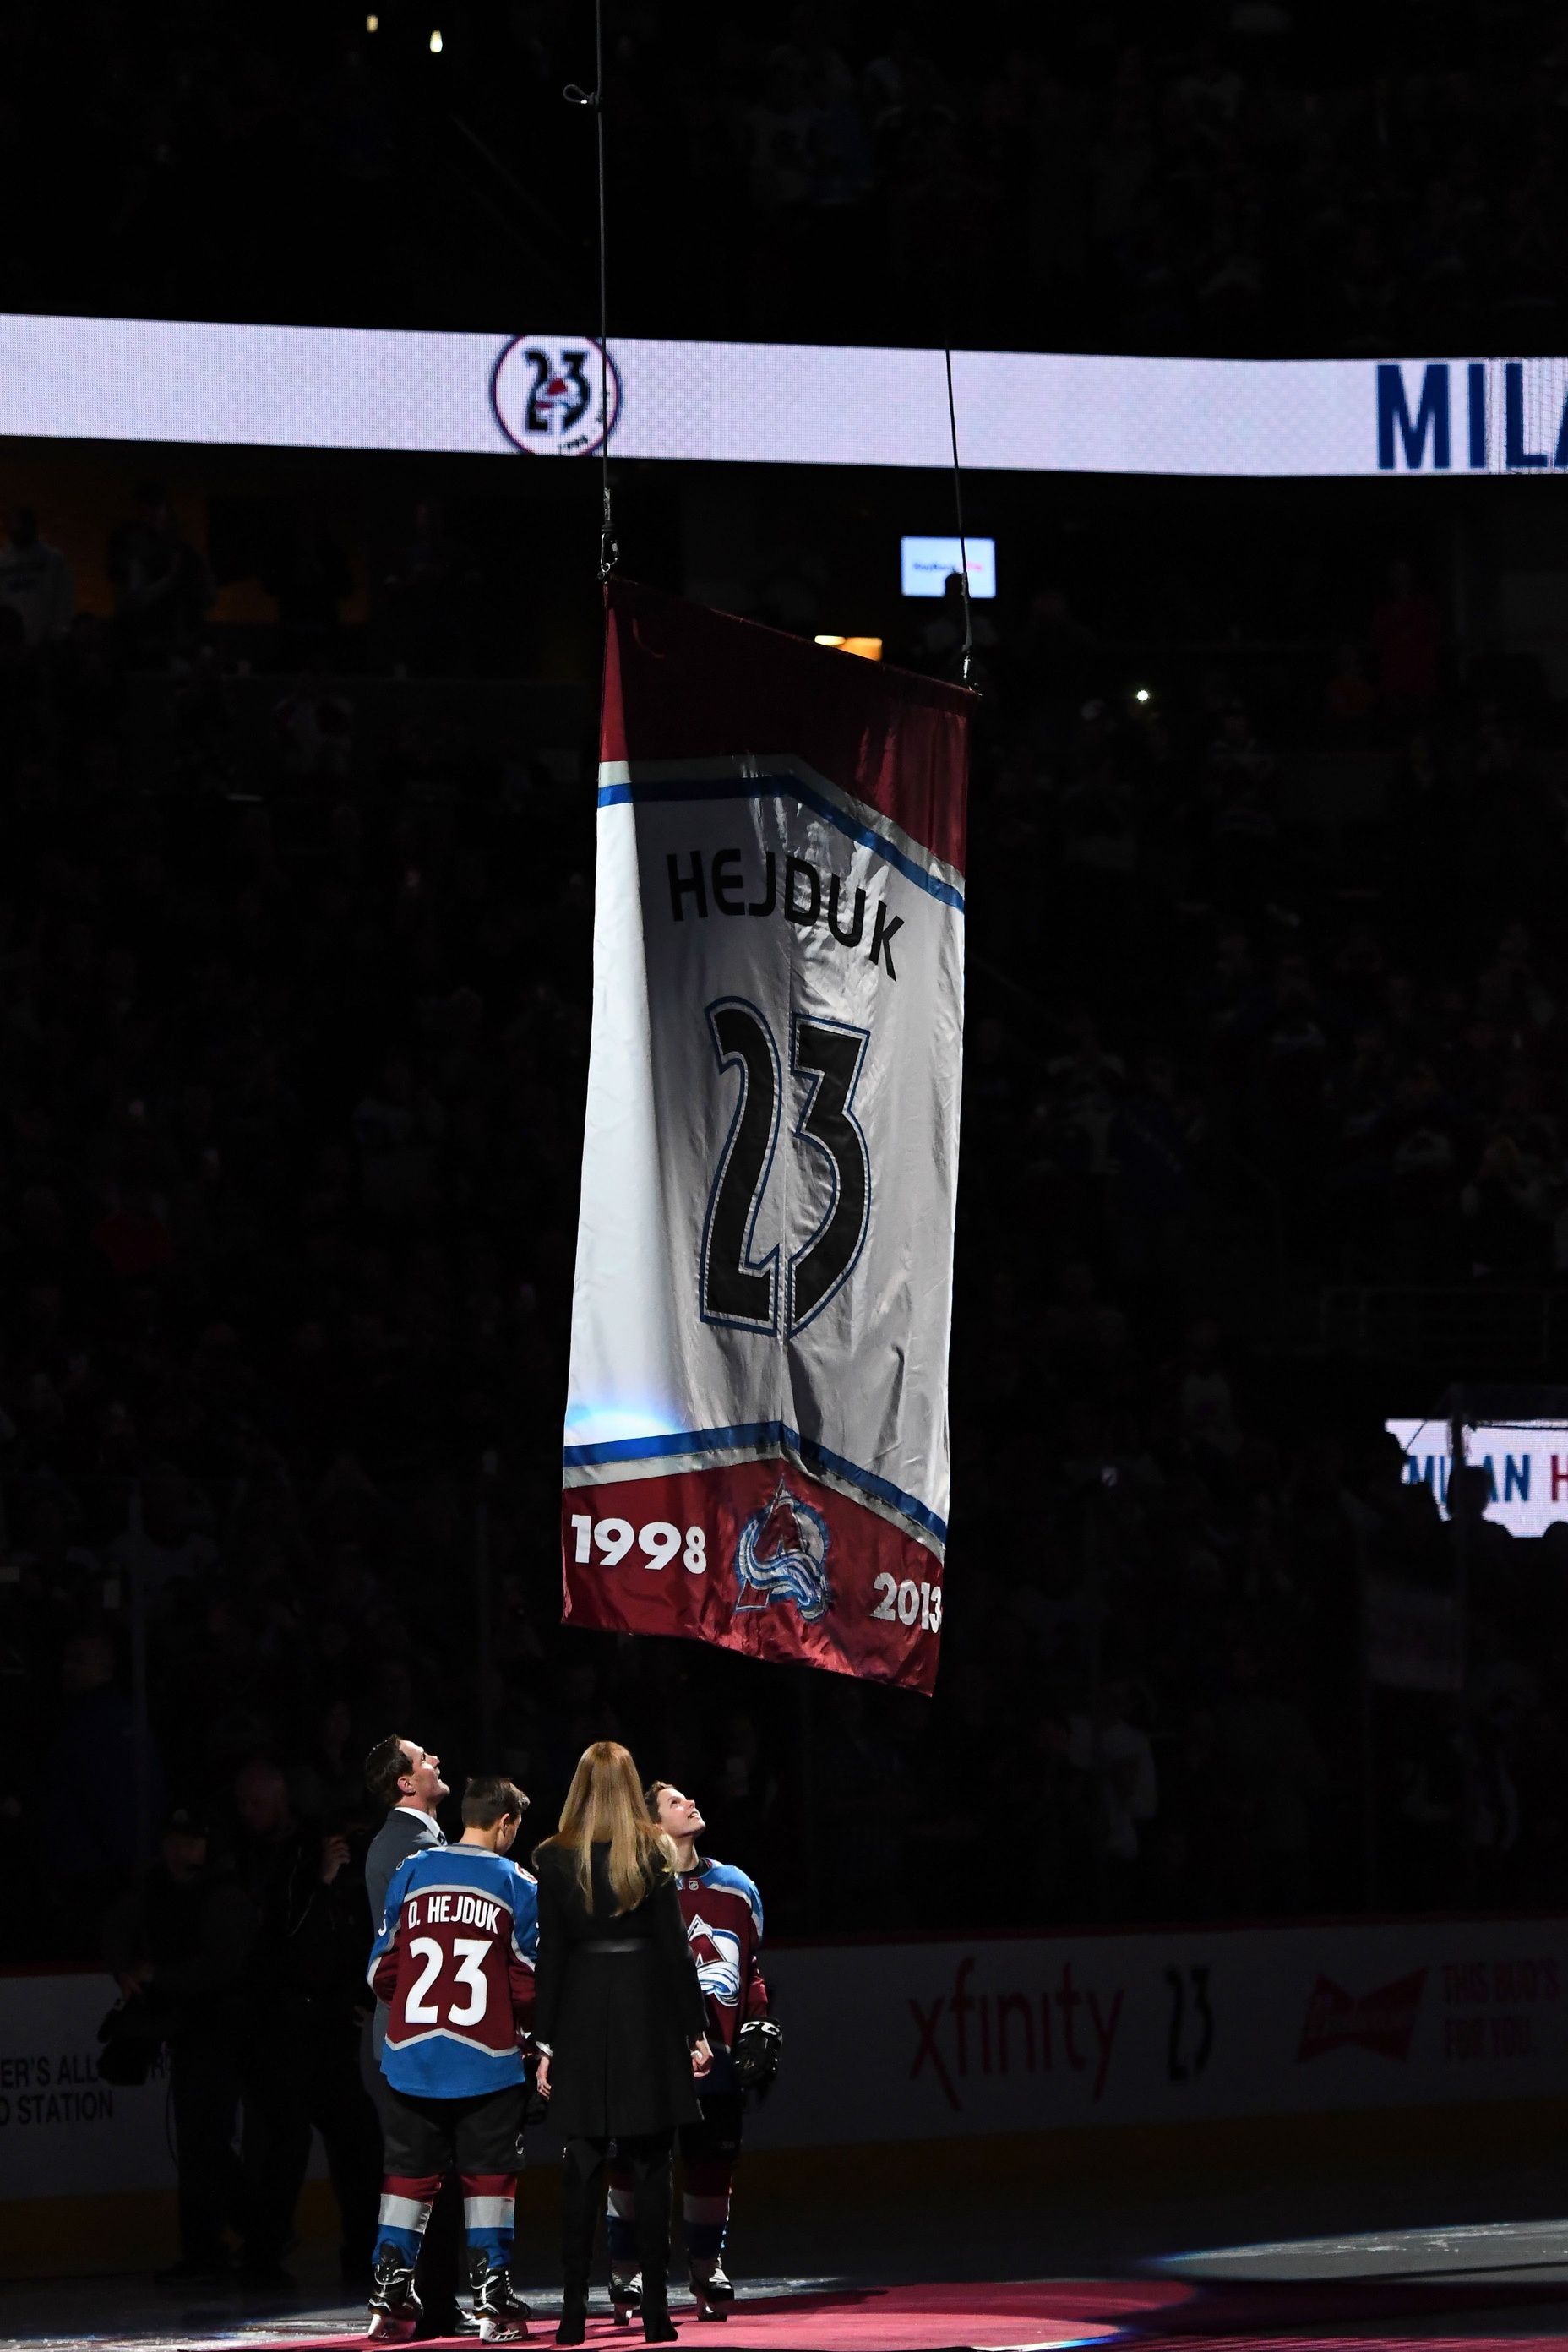 Milan Hejduk No. 23 retired by Colorado Avalanche